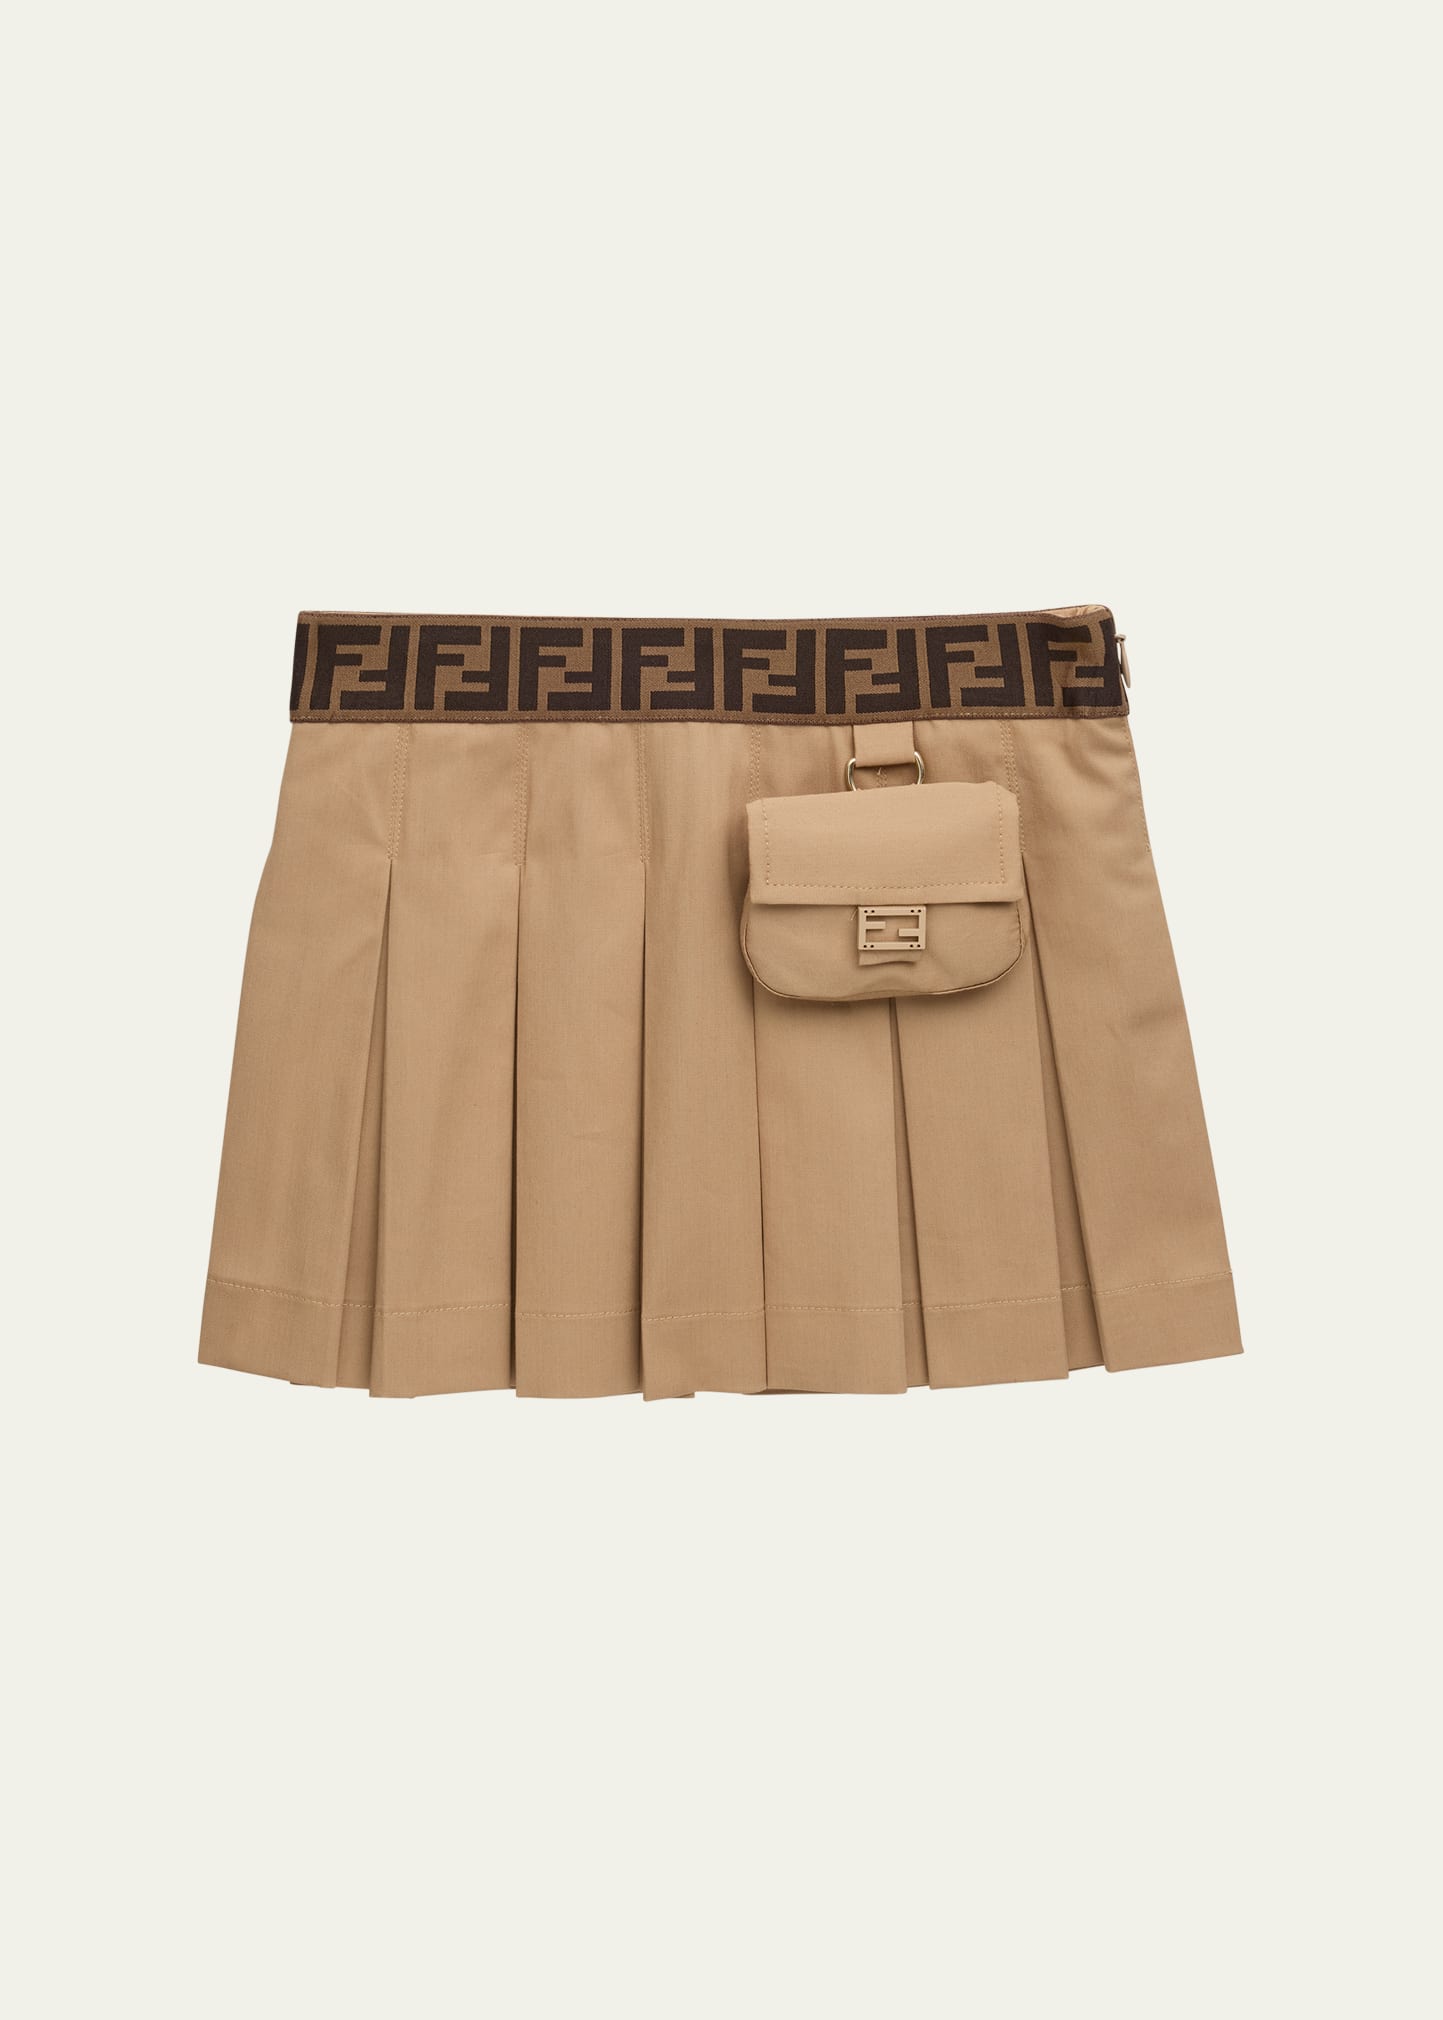 Fendi Kids' Girl's Pleated Ff Mini Skirt With Pouch In F1f4g Trench